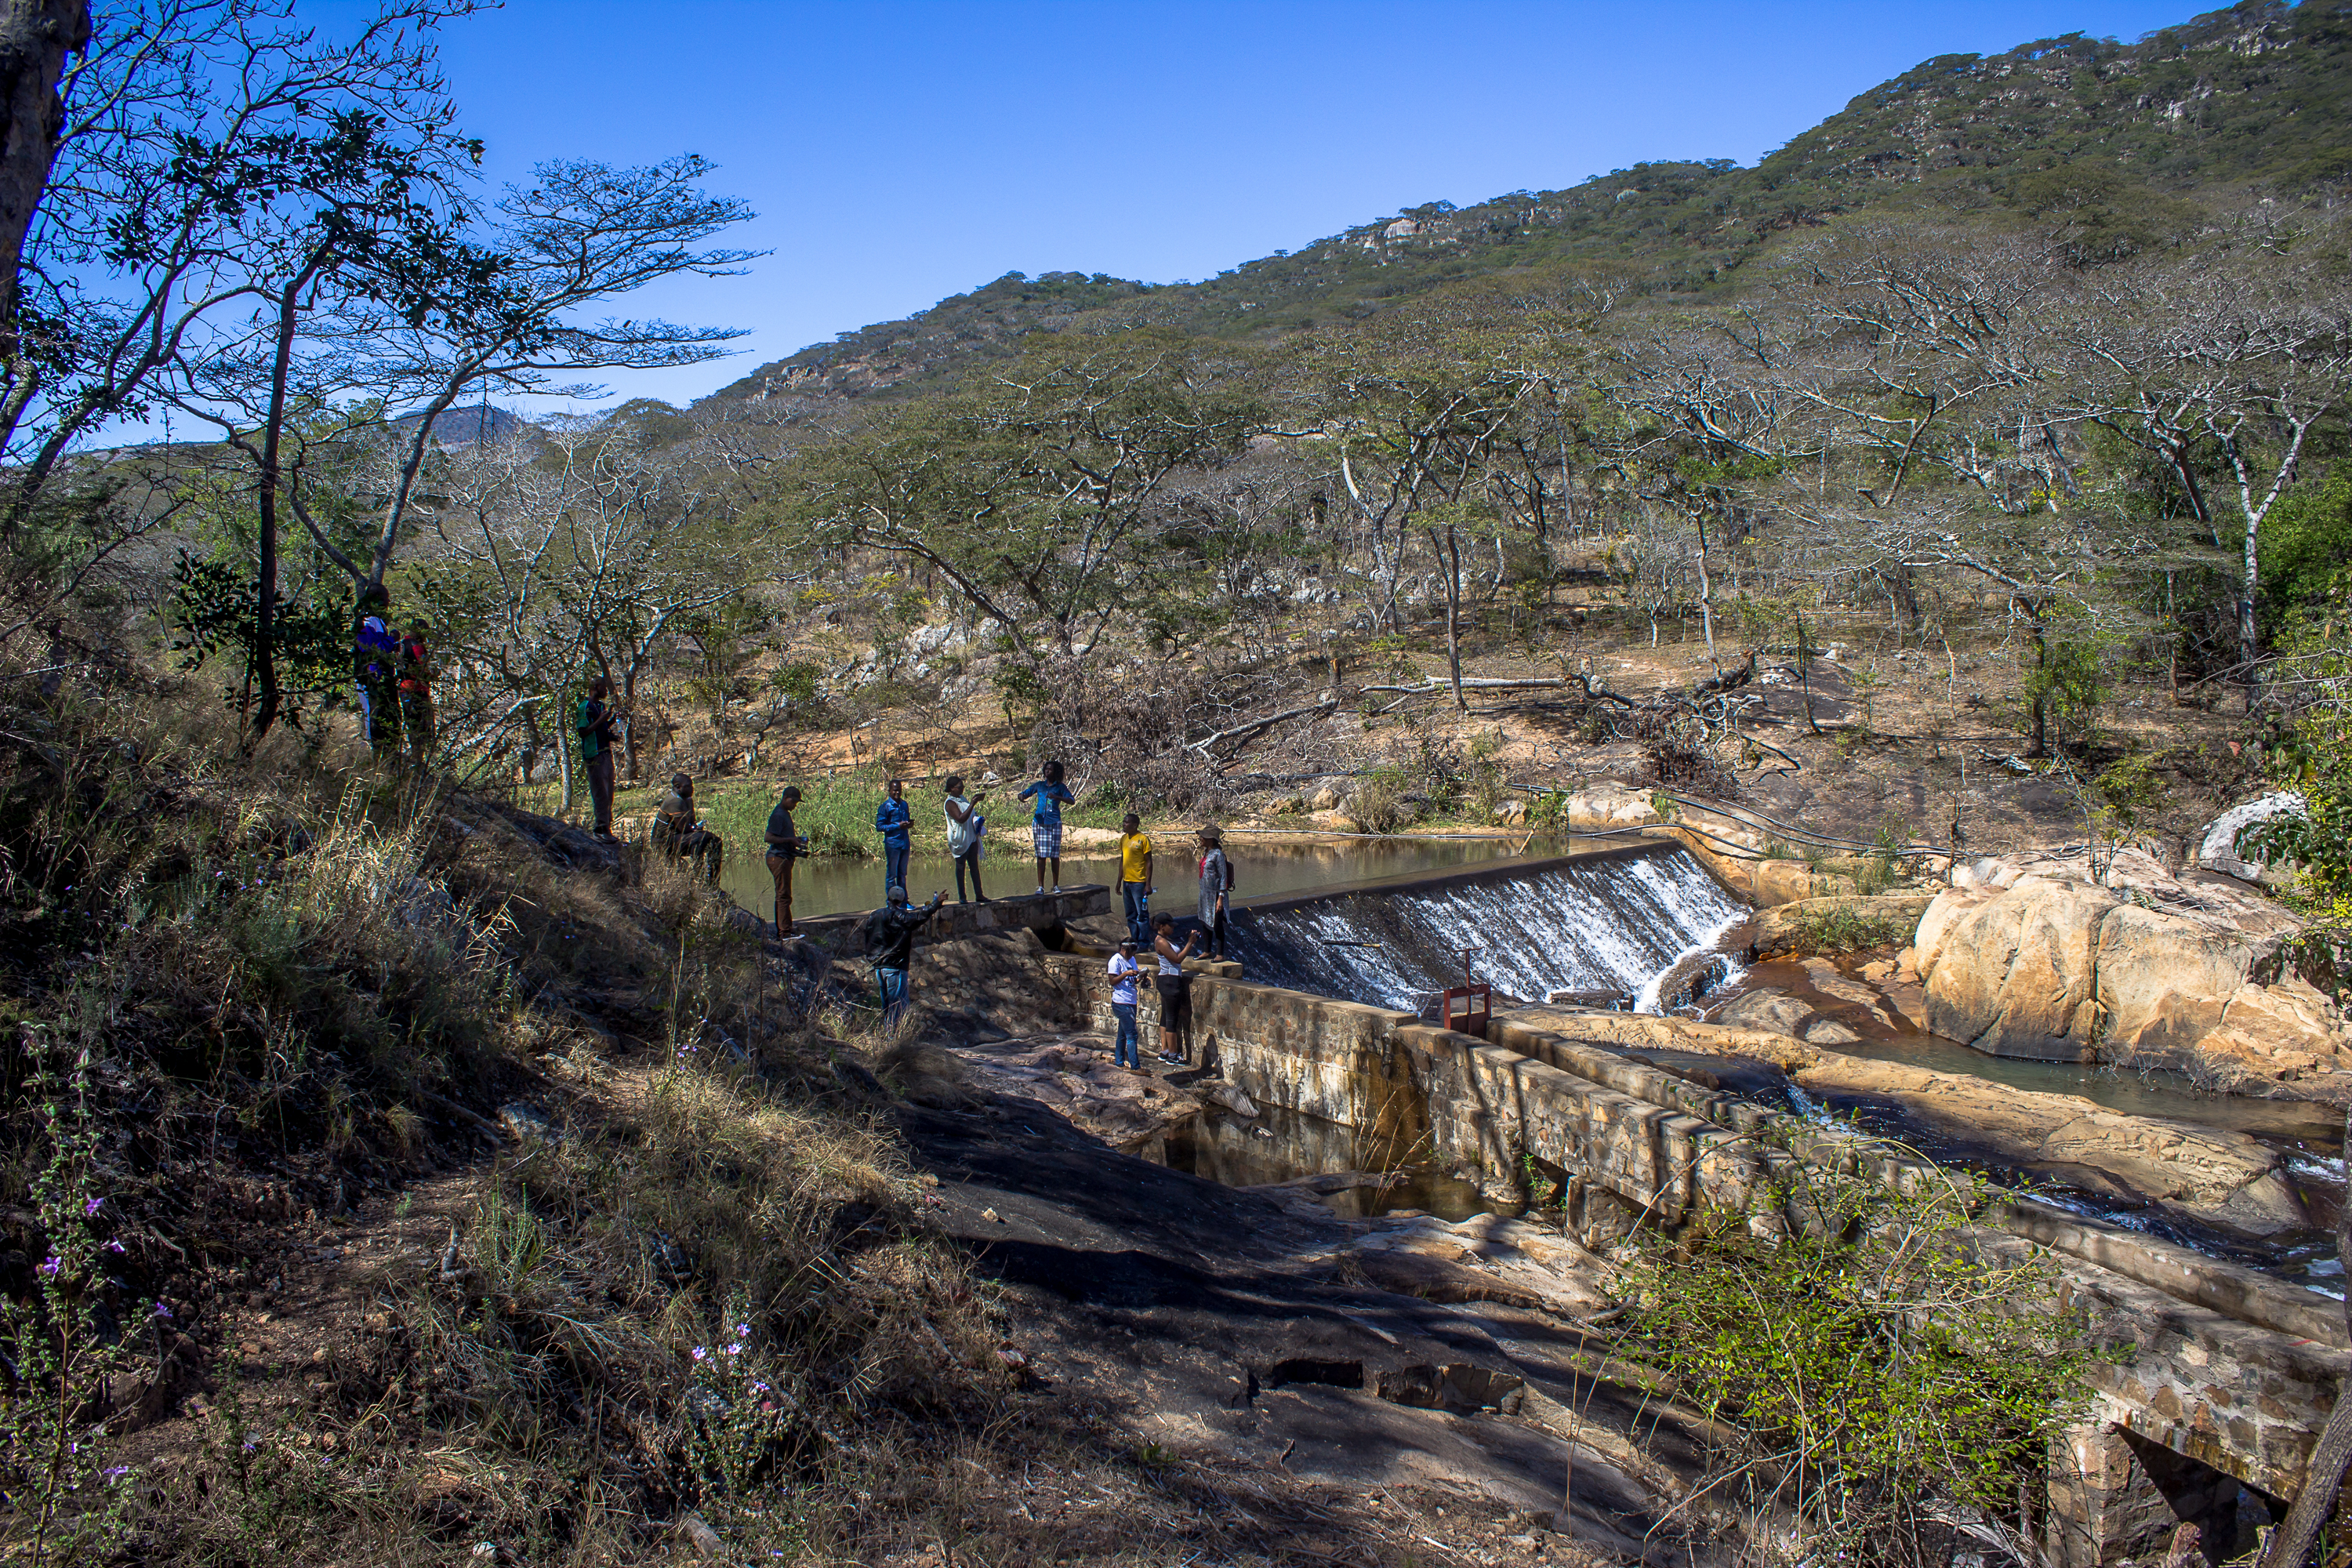 With More Support, Chipendeke Micro Hydro Project Set to Grow